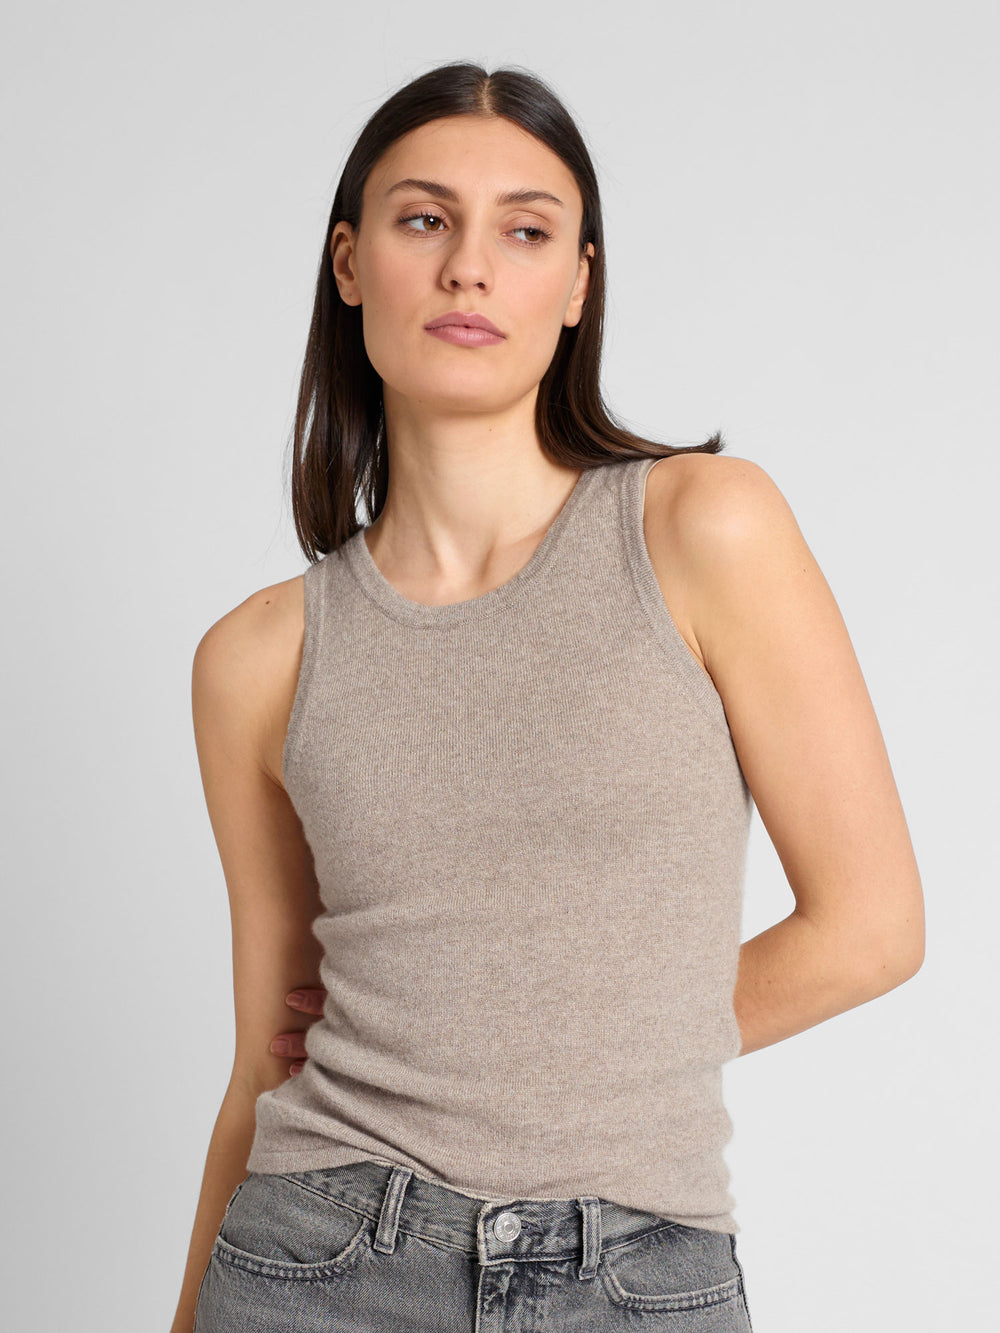 Cashmere singlet "Tyra" in 100% pure cashmere. Scandinavian design by Kashmina. Color: Toast.